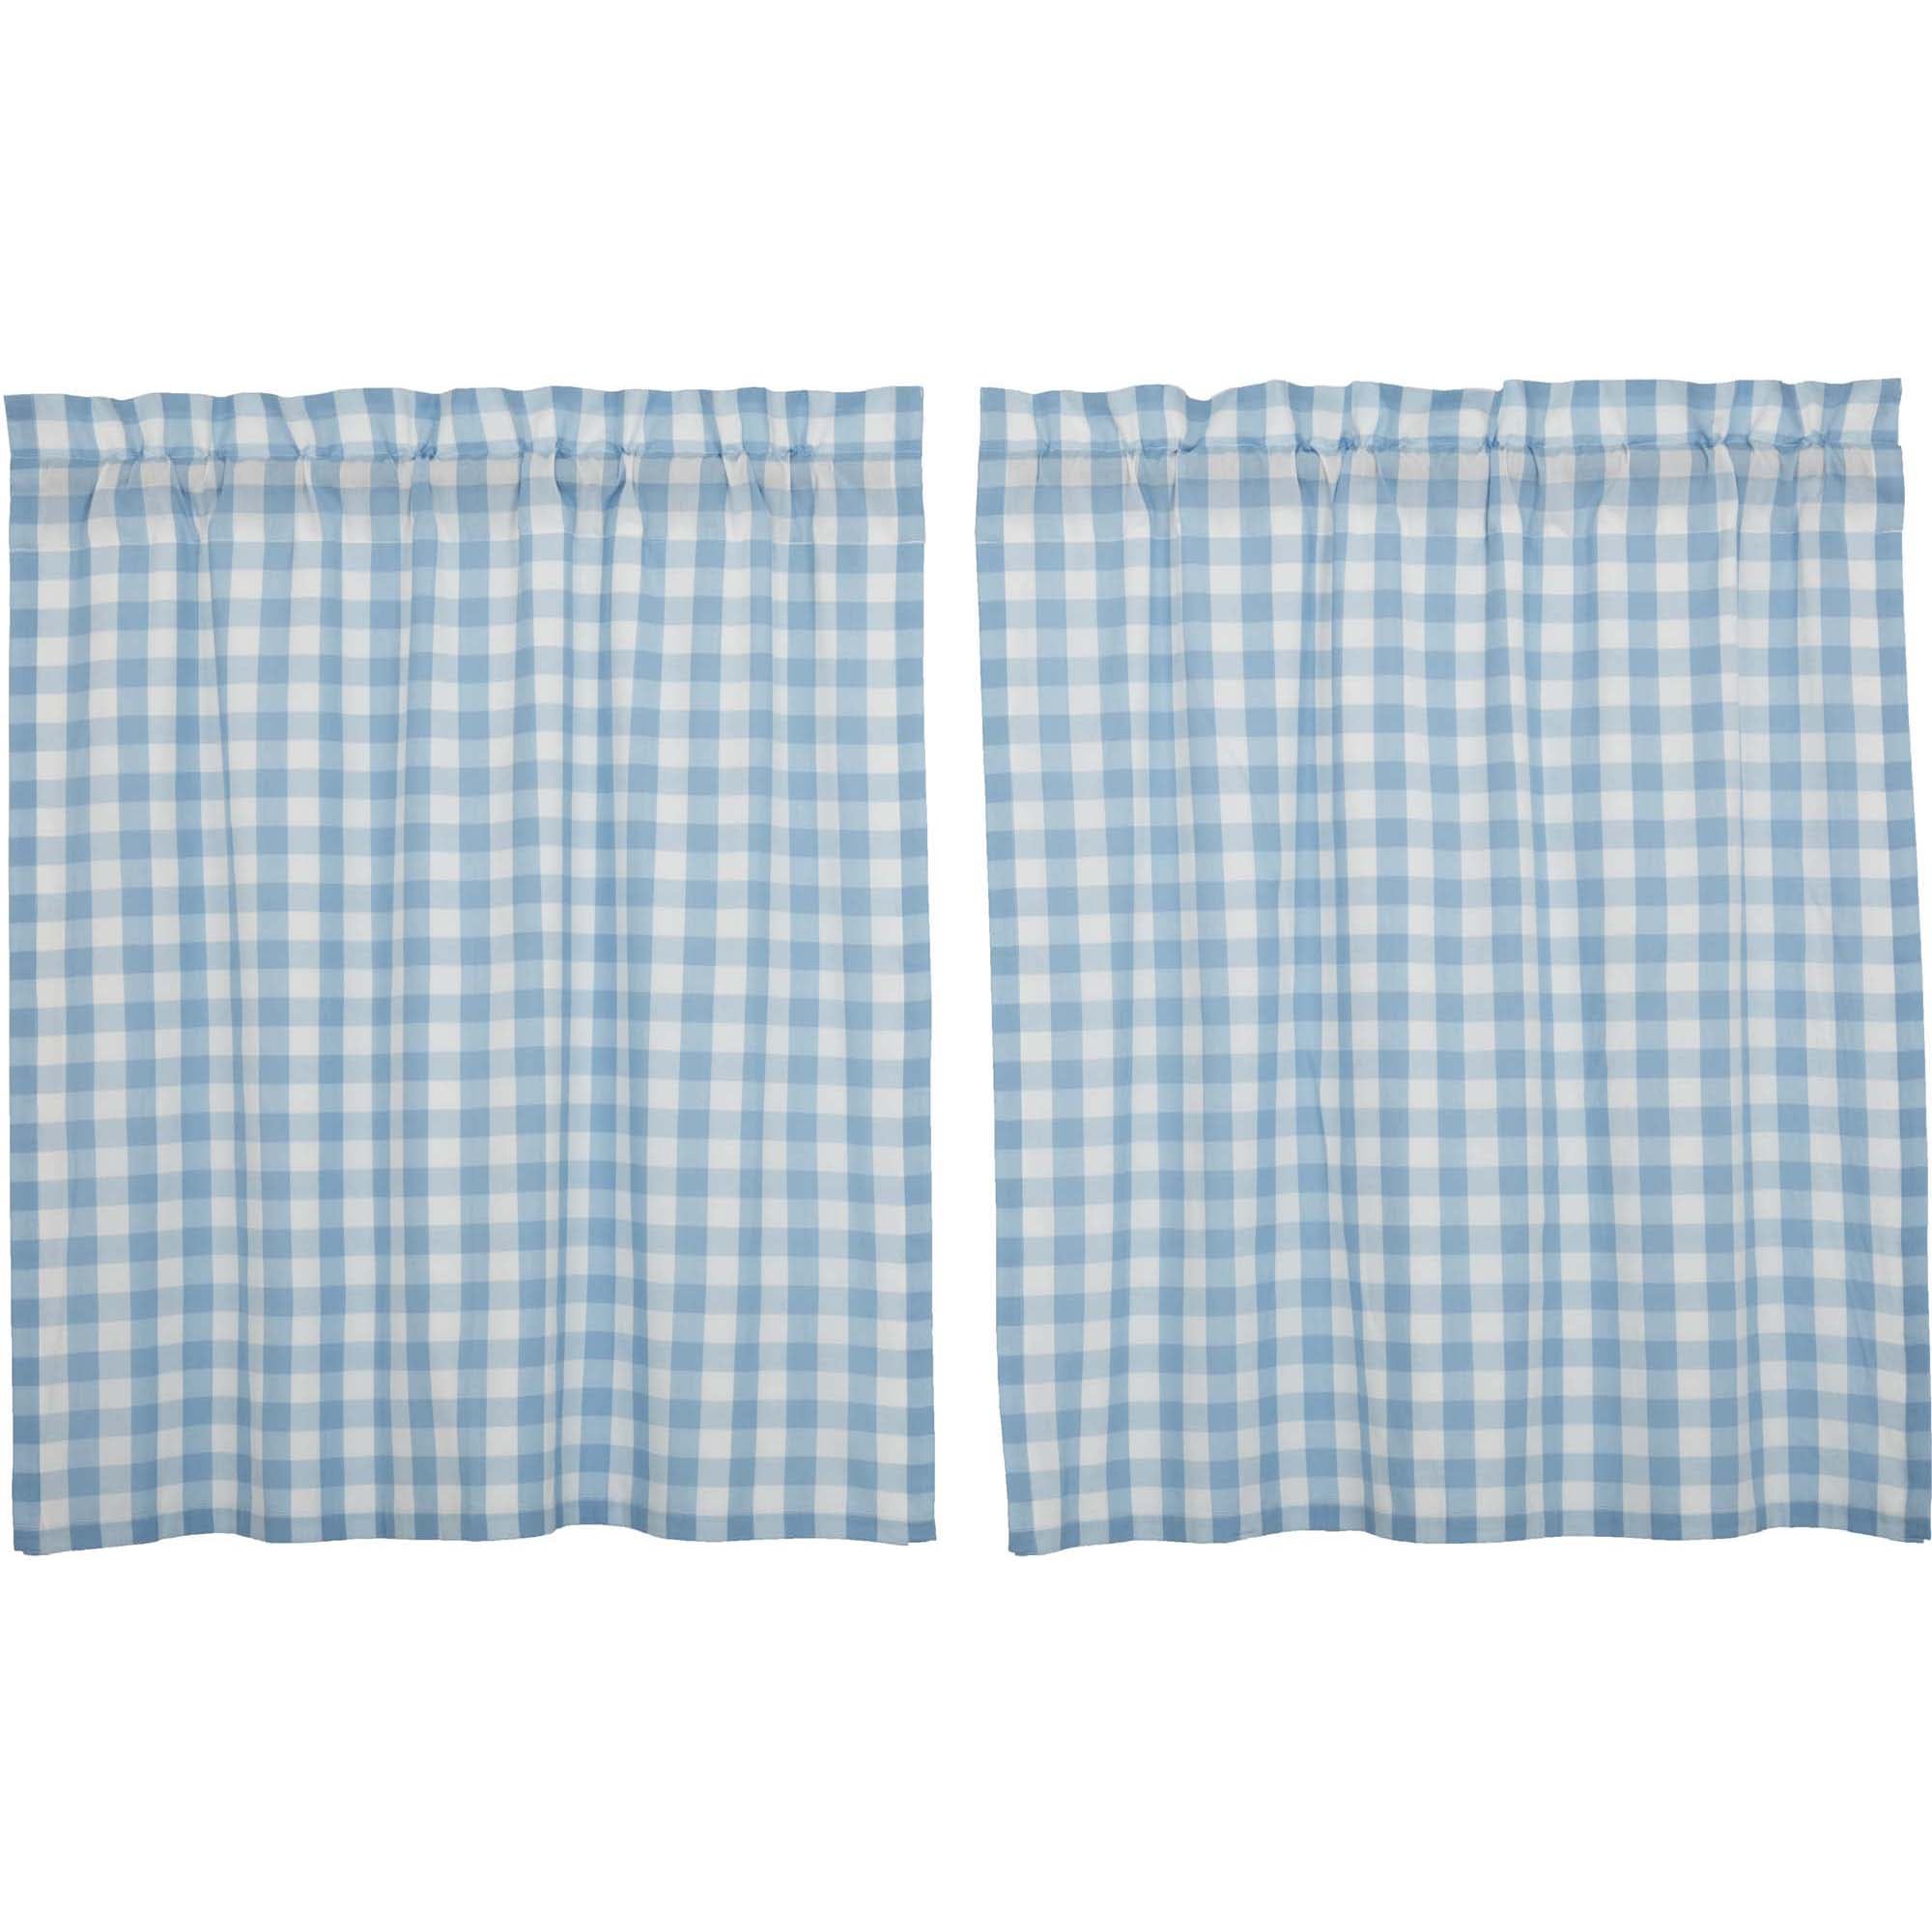 April & Olive Annie Buffalo Blue Check Tier Set of 2 L36xW36 By VHC Brands